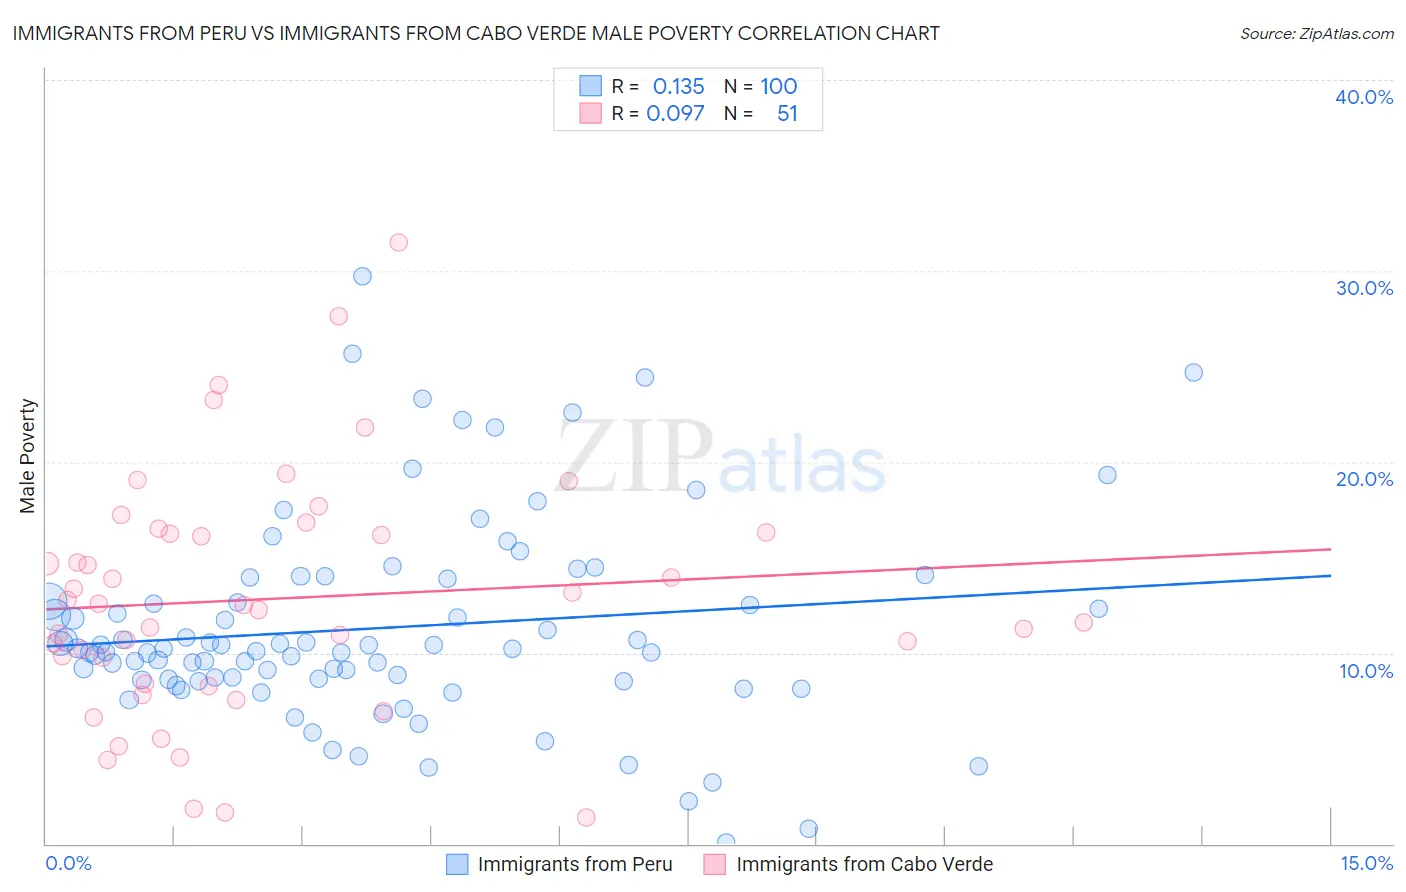 Immigrants from Peru vs Immigrants from Cabo Verde Male Poverty